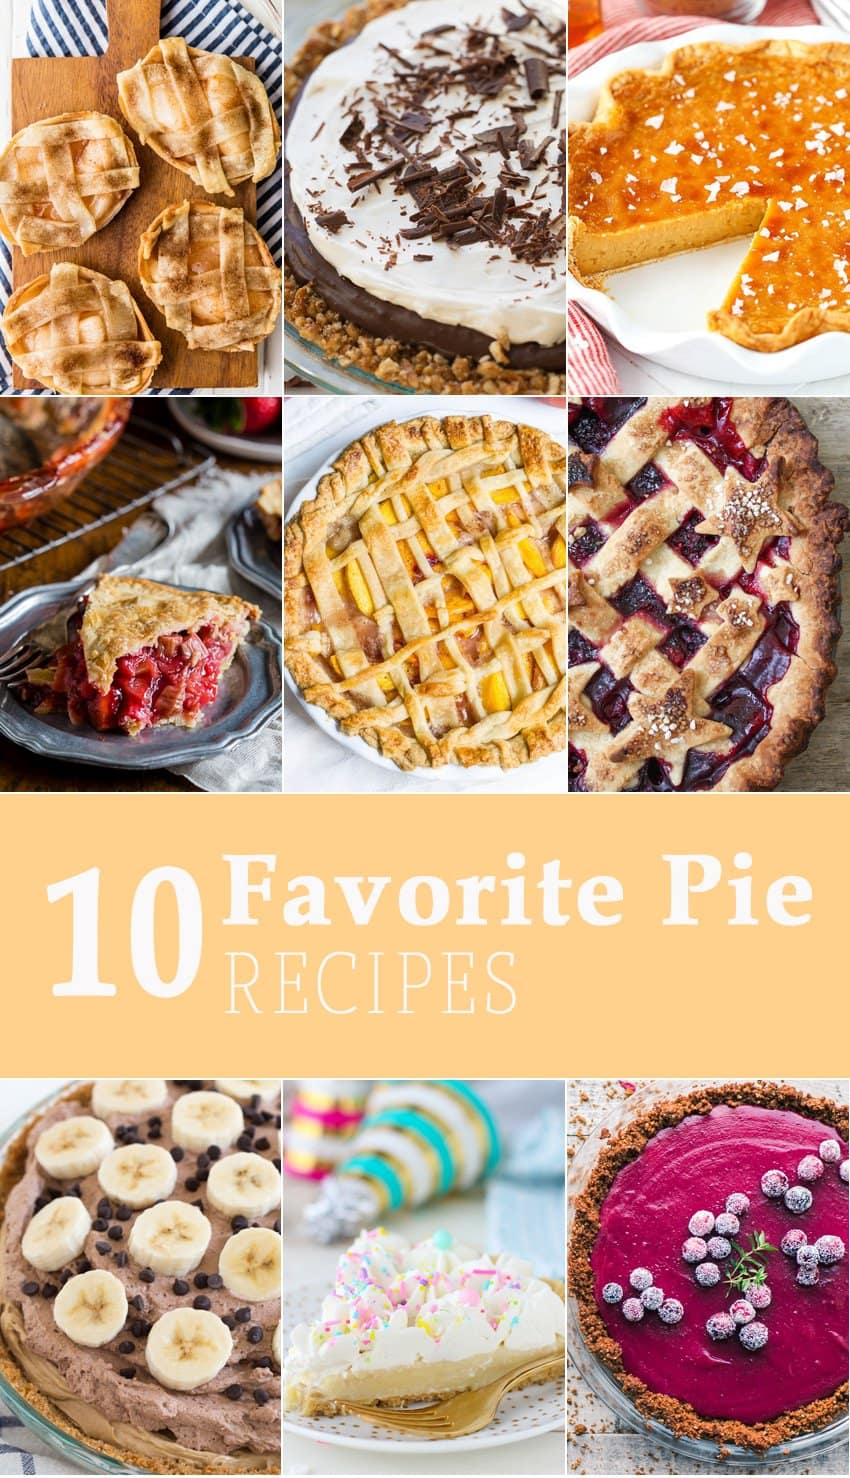 10 FAVORITE PIE RECIPES FOR PI DAY! 10 fun and easy pie recipes perfect for year round, but especially the best holiday ever, Pi Day!